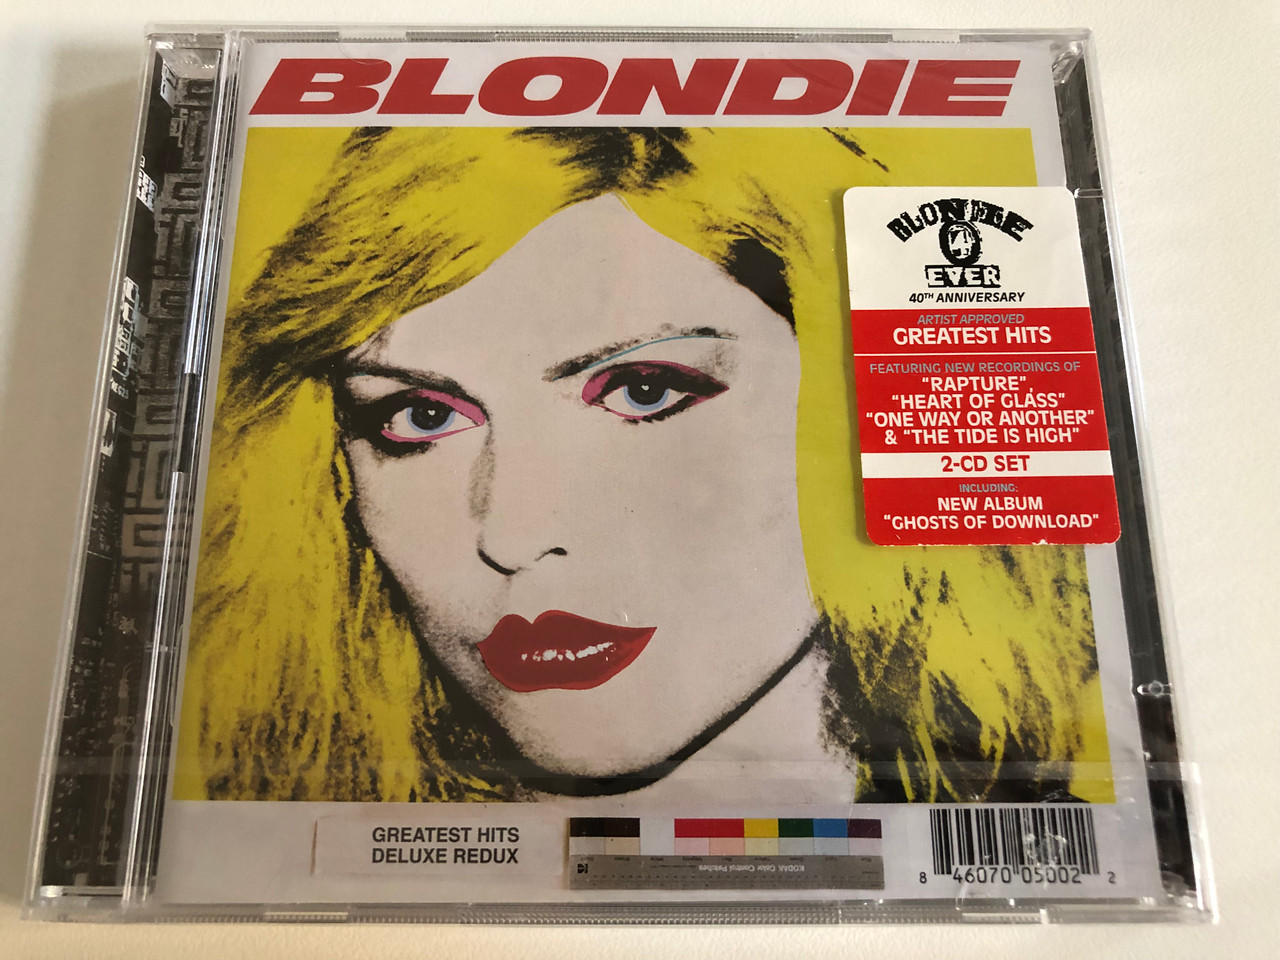 https://cdn10.bigcommerce.com/s-62bdpkt7pb/products/31562/images/185389/Blondie_Greatest_Hits_Deluxe_Redux_Artist_Approved_Greates_Hits_Featuring_New_Recordings_Of_Rapture_Heart_Of_Glass_One_Way_Or_Another_The_Tide_Is_High_Five_Seven_Mus_1__55069.1627041877.1280.1280.JPG?c=2&_gl=1*pcw64l*_ga*MjAyOTE0ODY1OS4xNTkyNDY2ODc5*_ga_WS2VZYPC6G*MTYyNzI4ODIwMC42OC4xLjE2MjczMTQ4MDYuNjA.